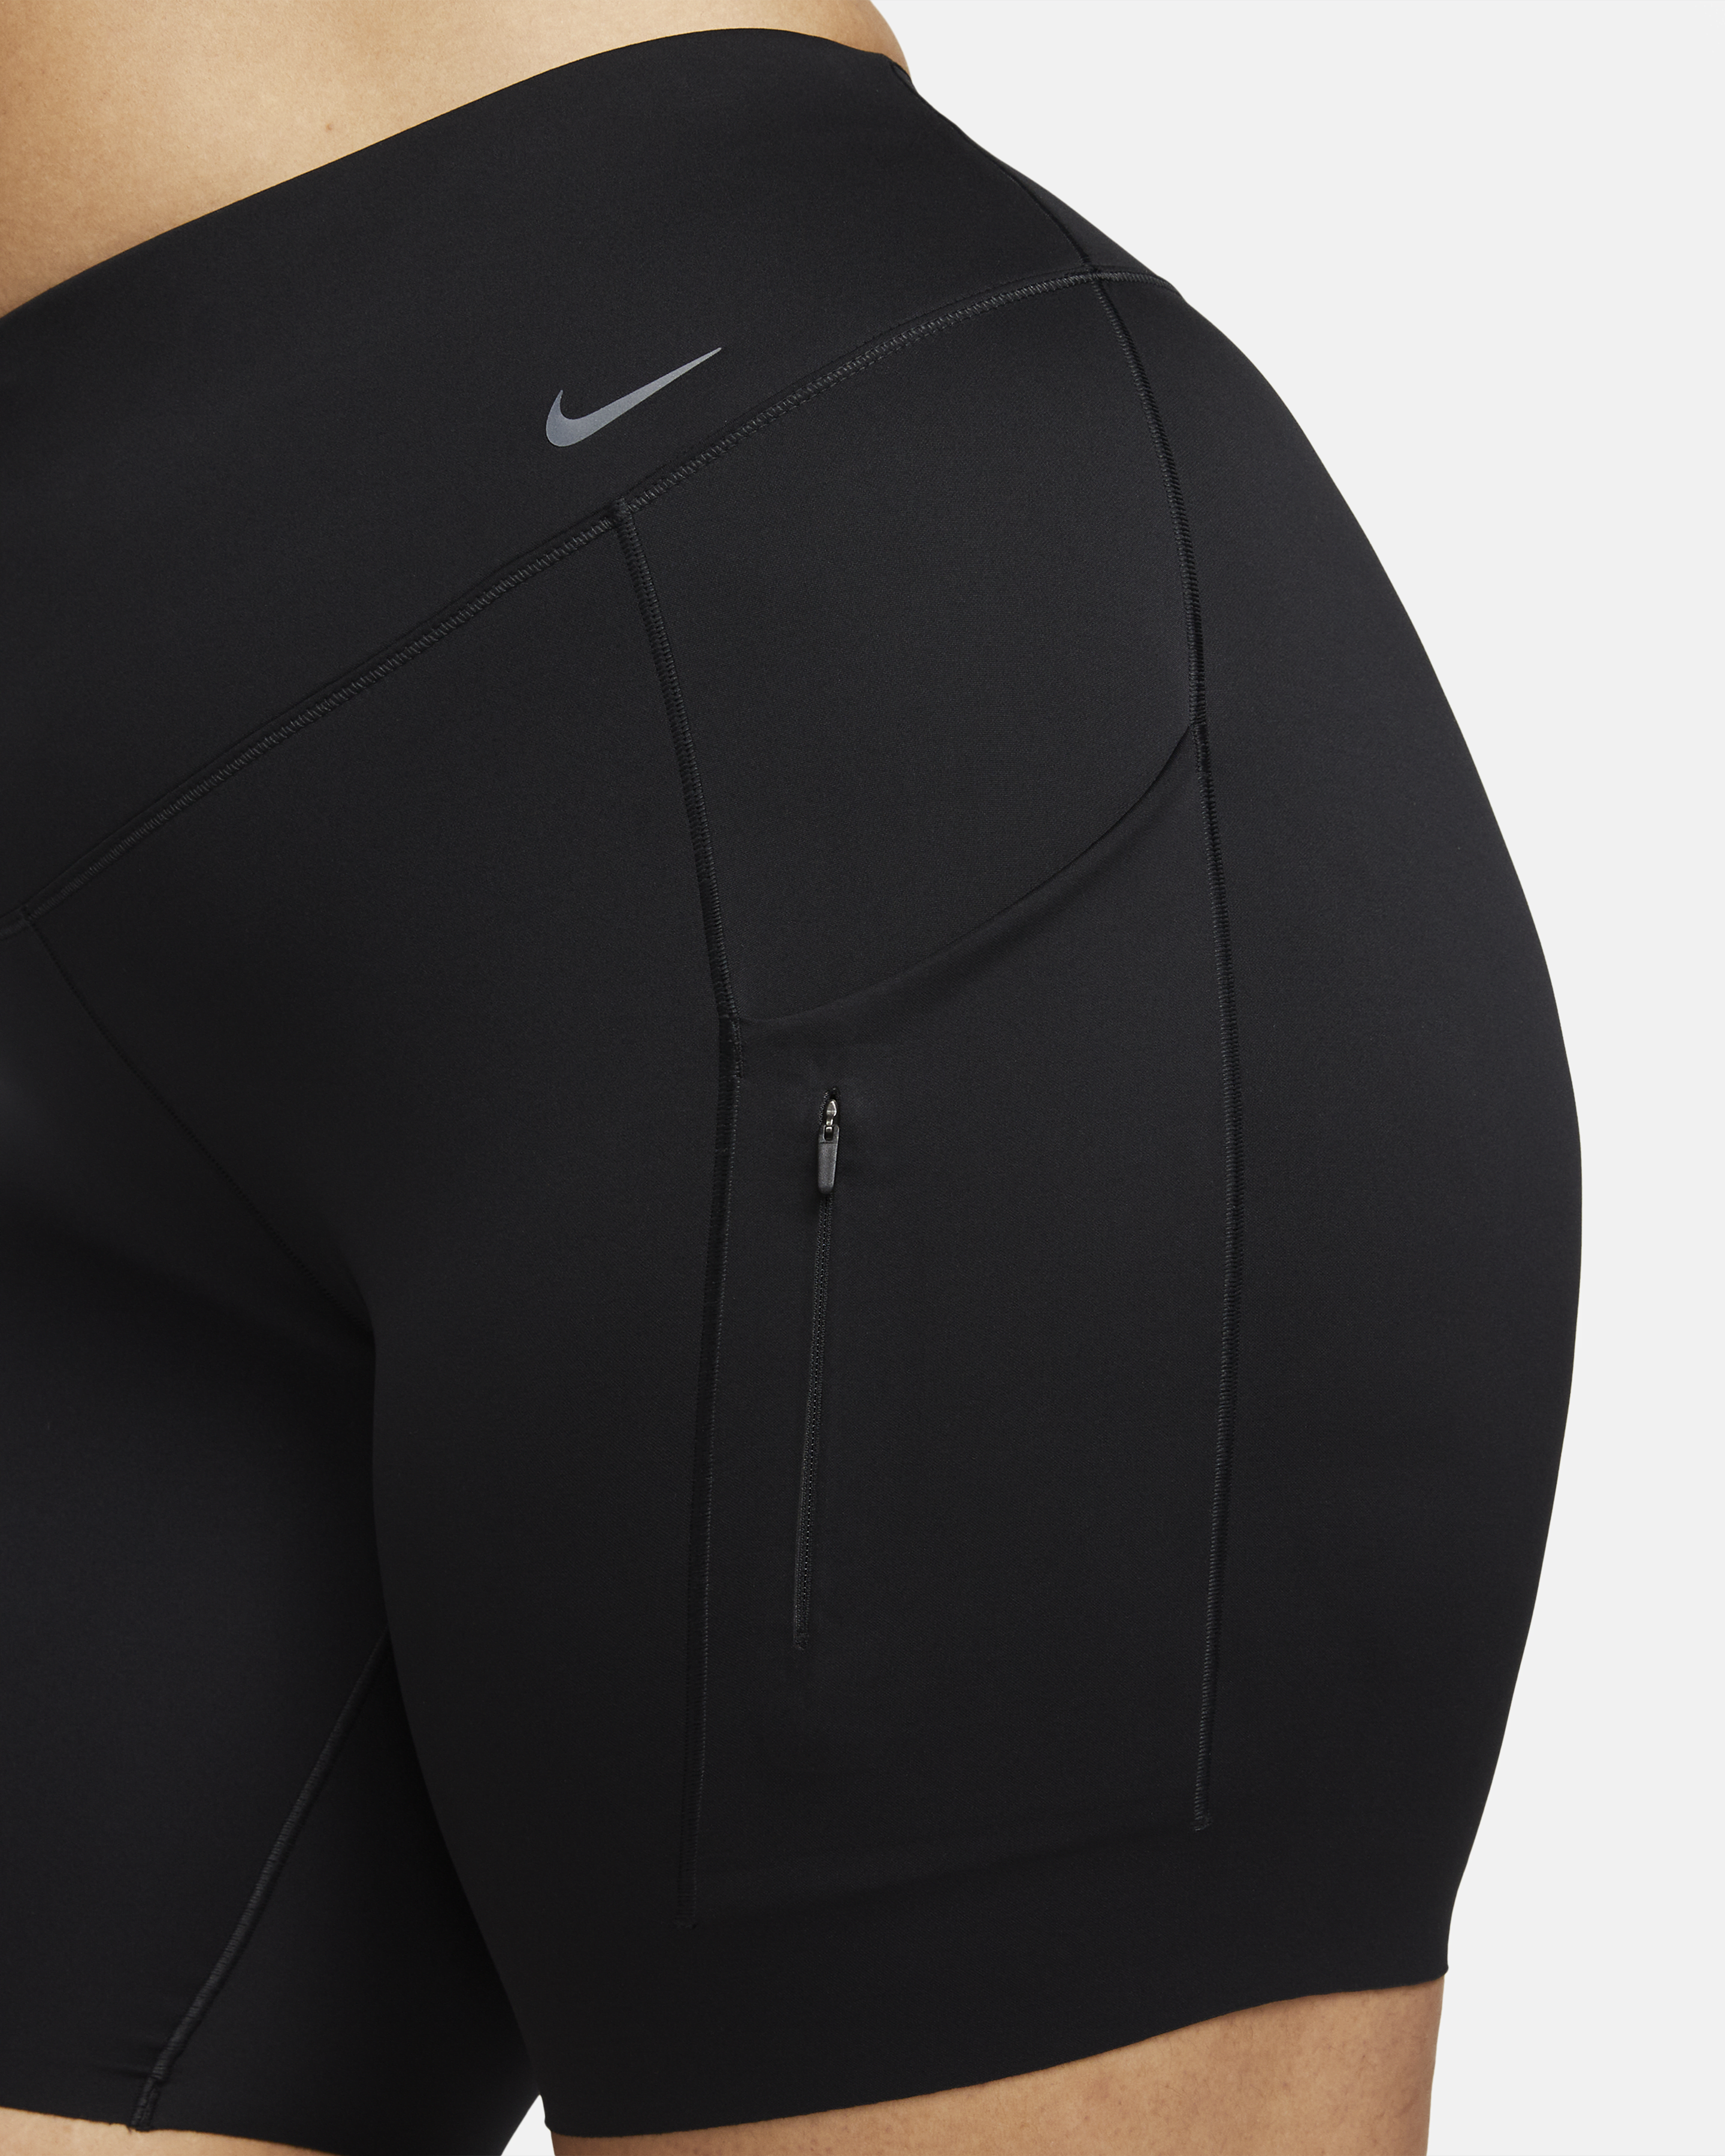 Best cycling - style running shorts for women in 2023 - has debuted the new  silhouette which is a cross between a sneaker and